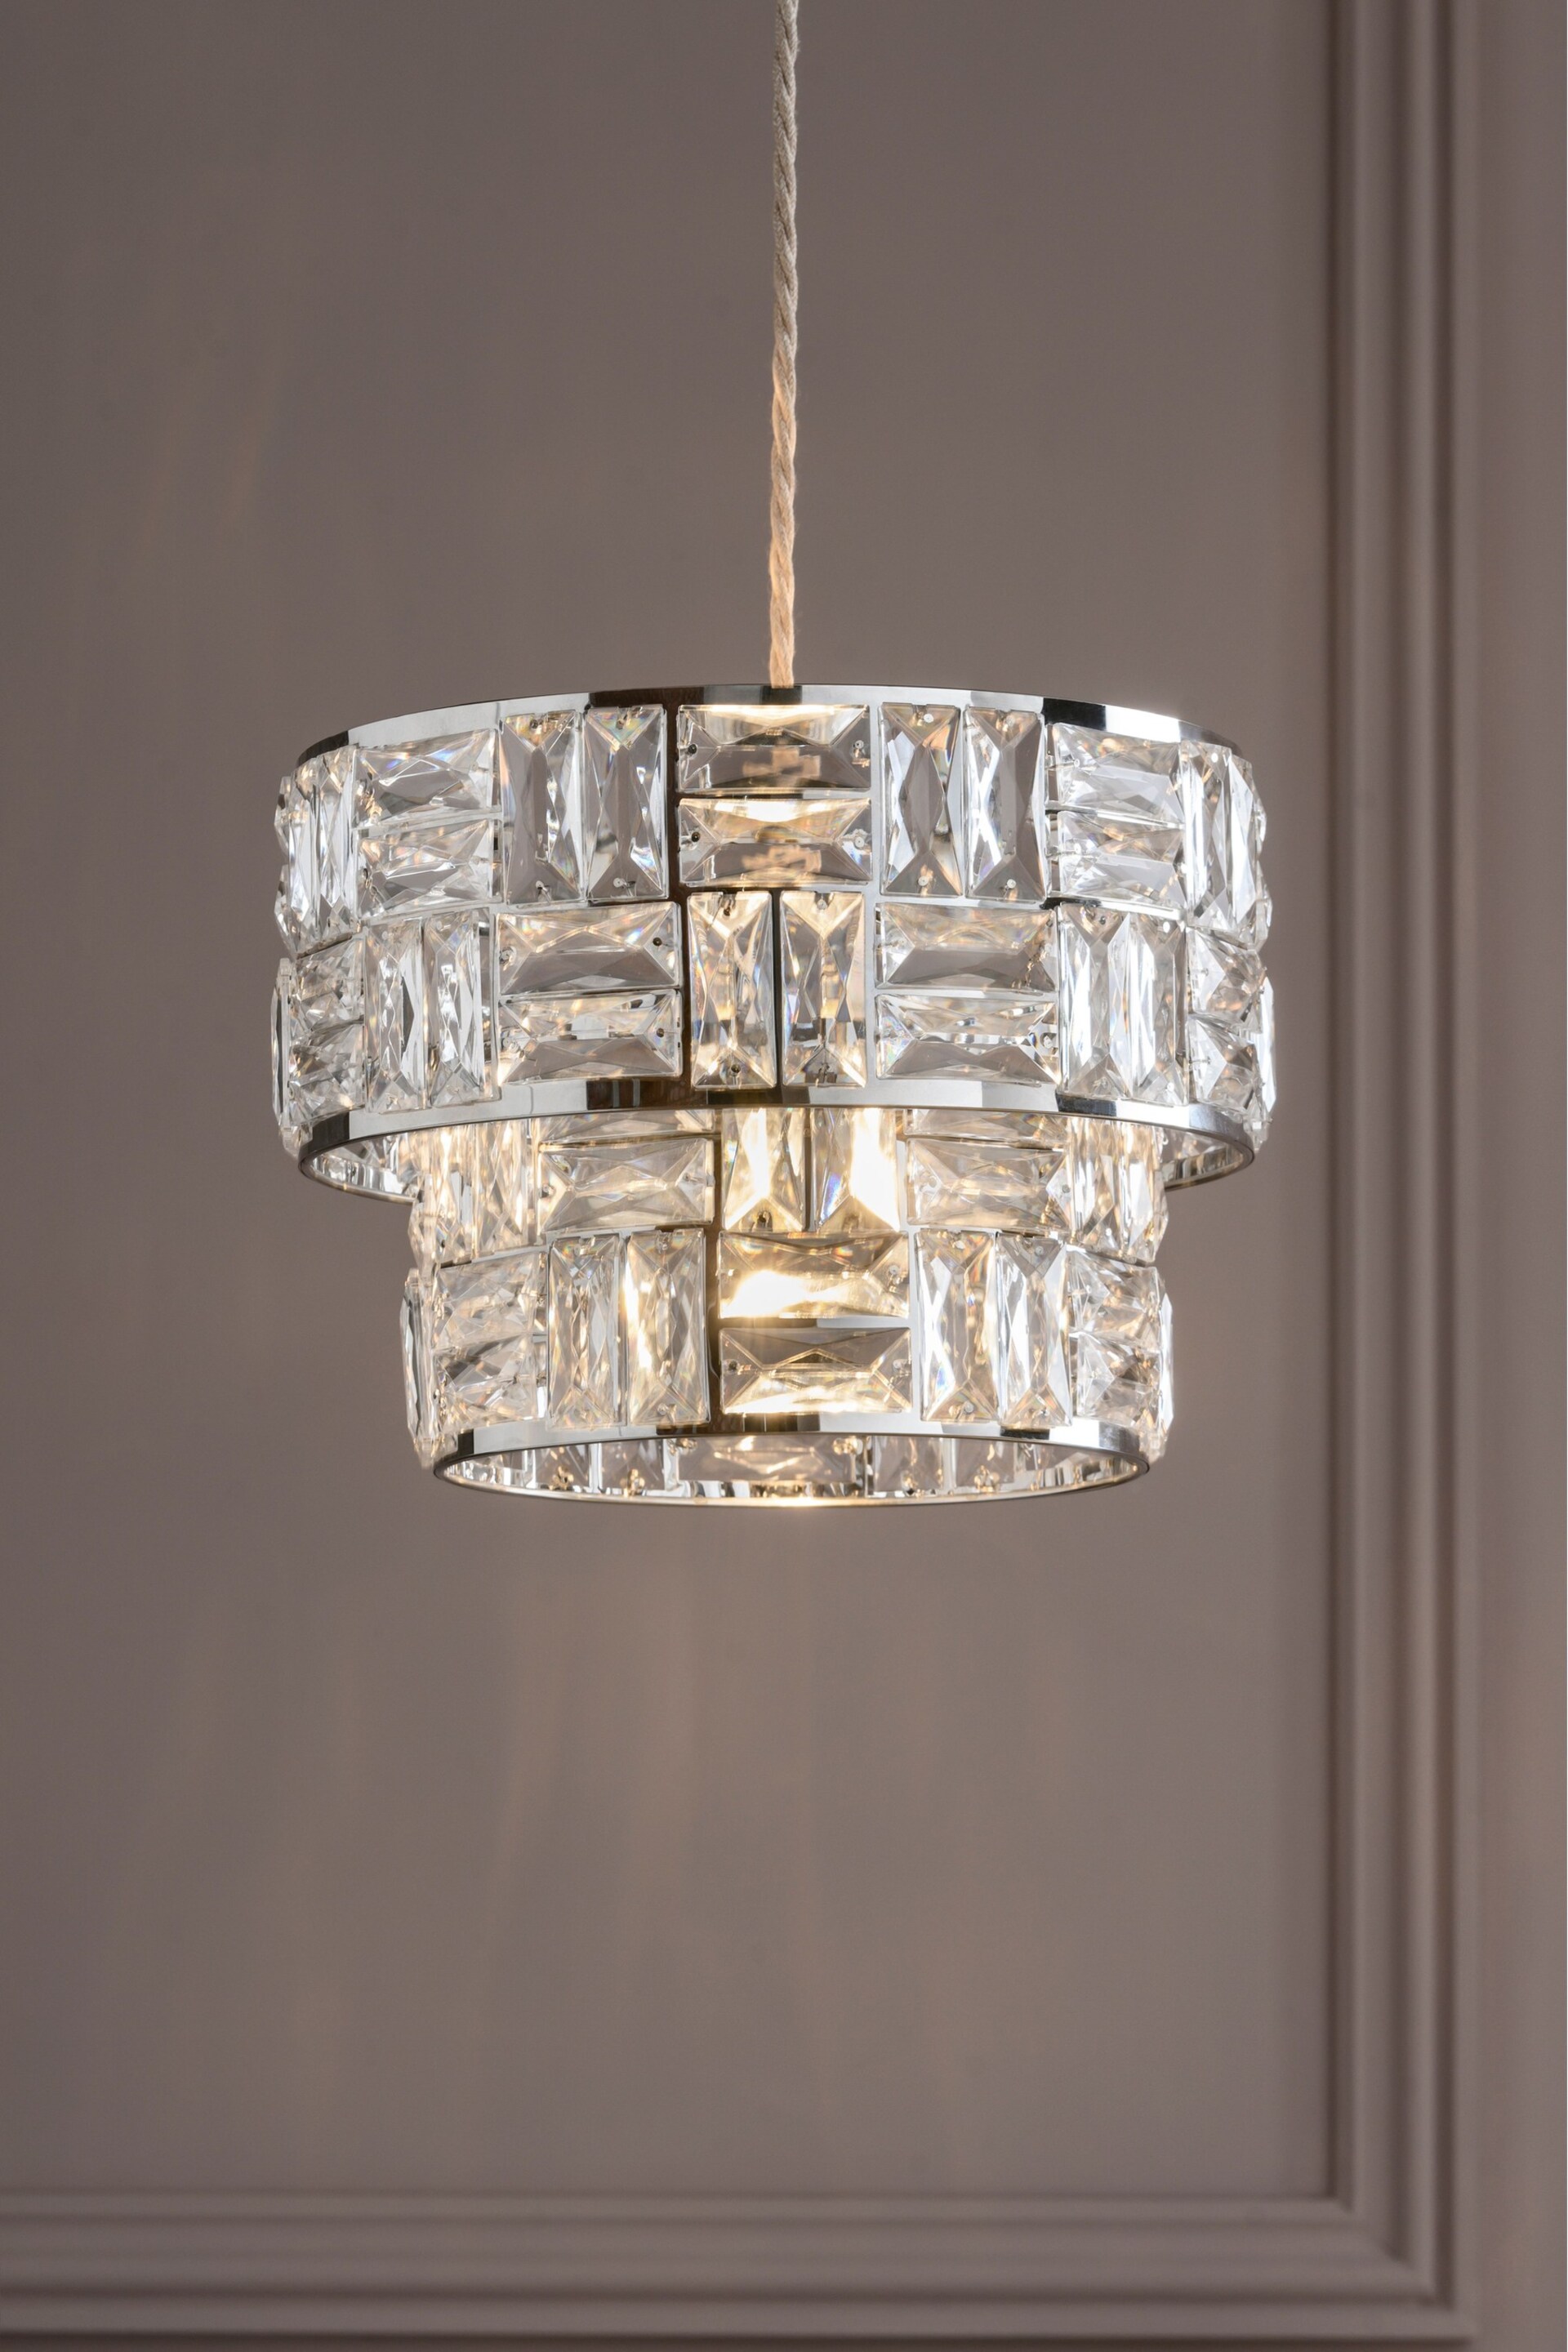 Chrome Alexis Easy Fit Pendant Lamp Shade - Image 1 of 7